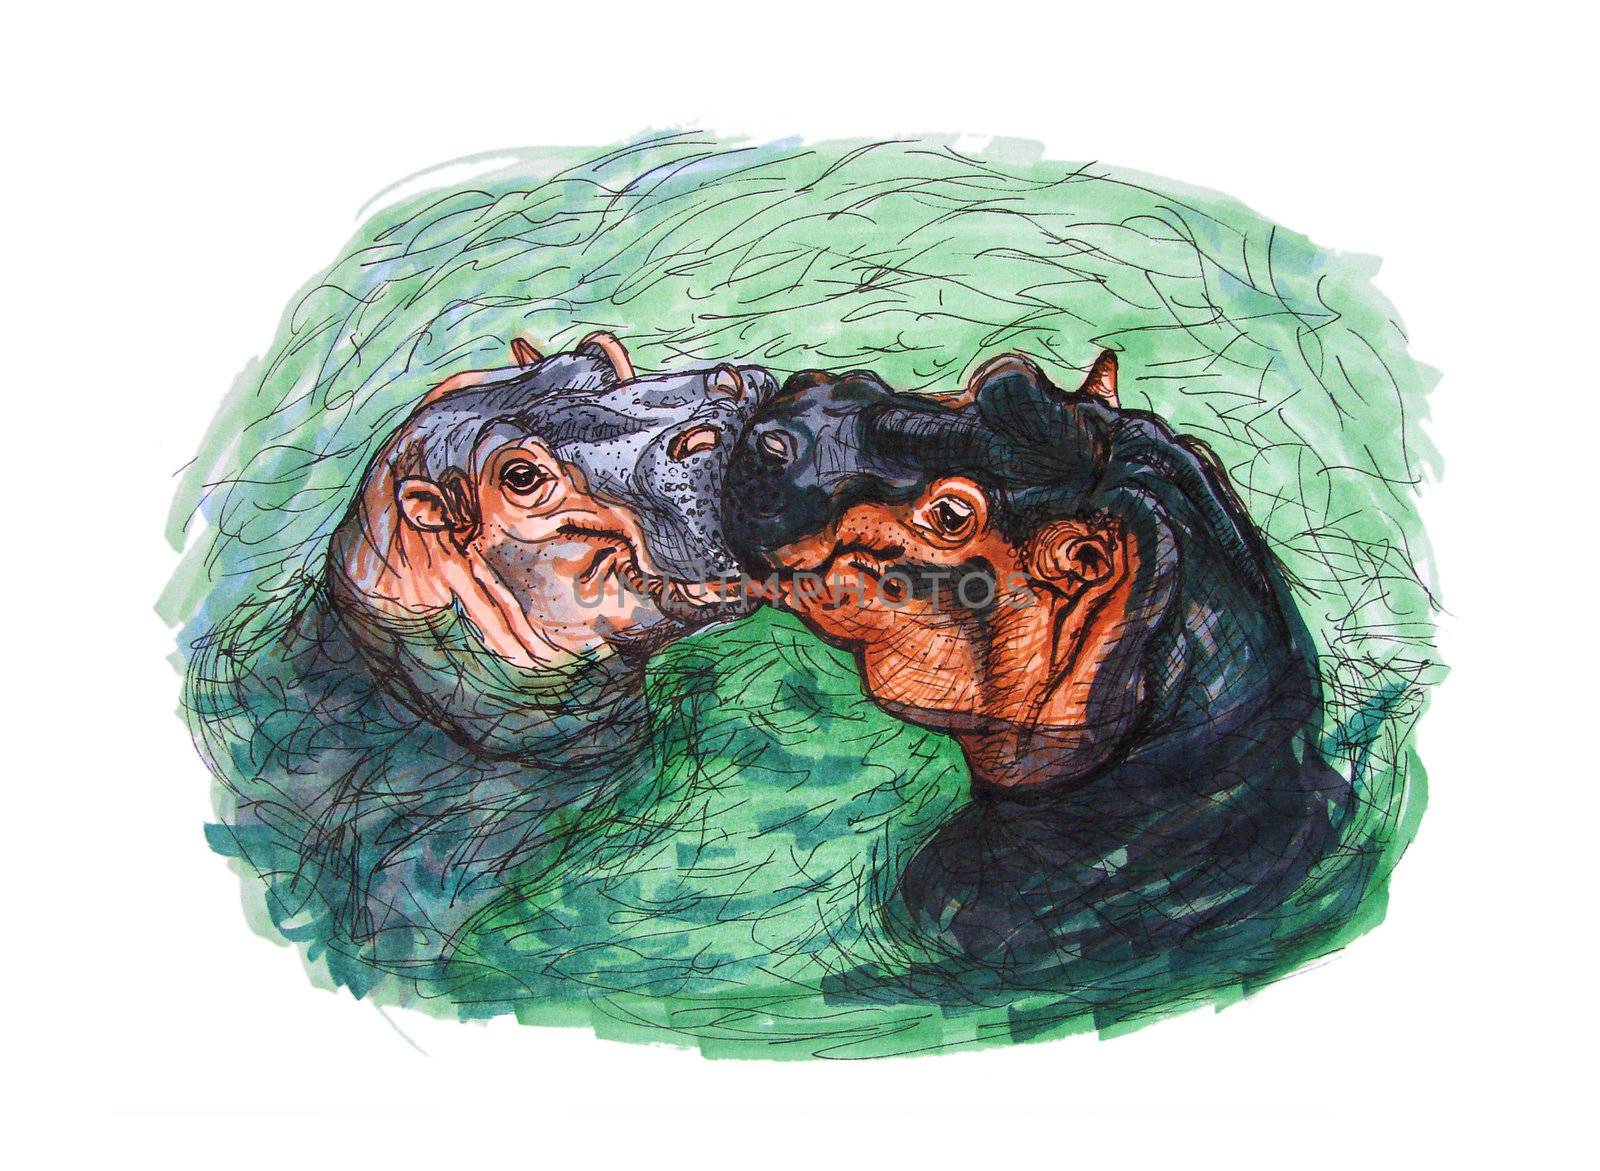 Ink drawing of two funny hippos seemingly kissing in turquoise water